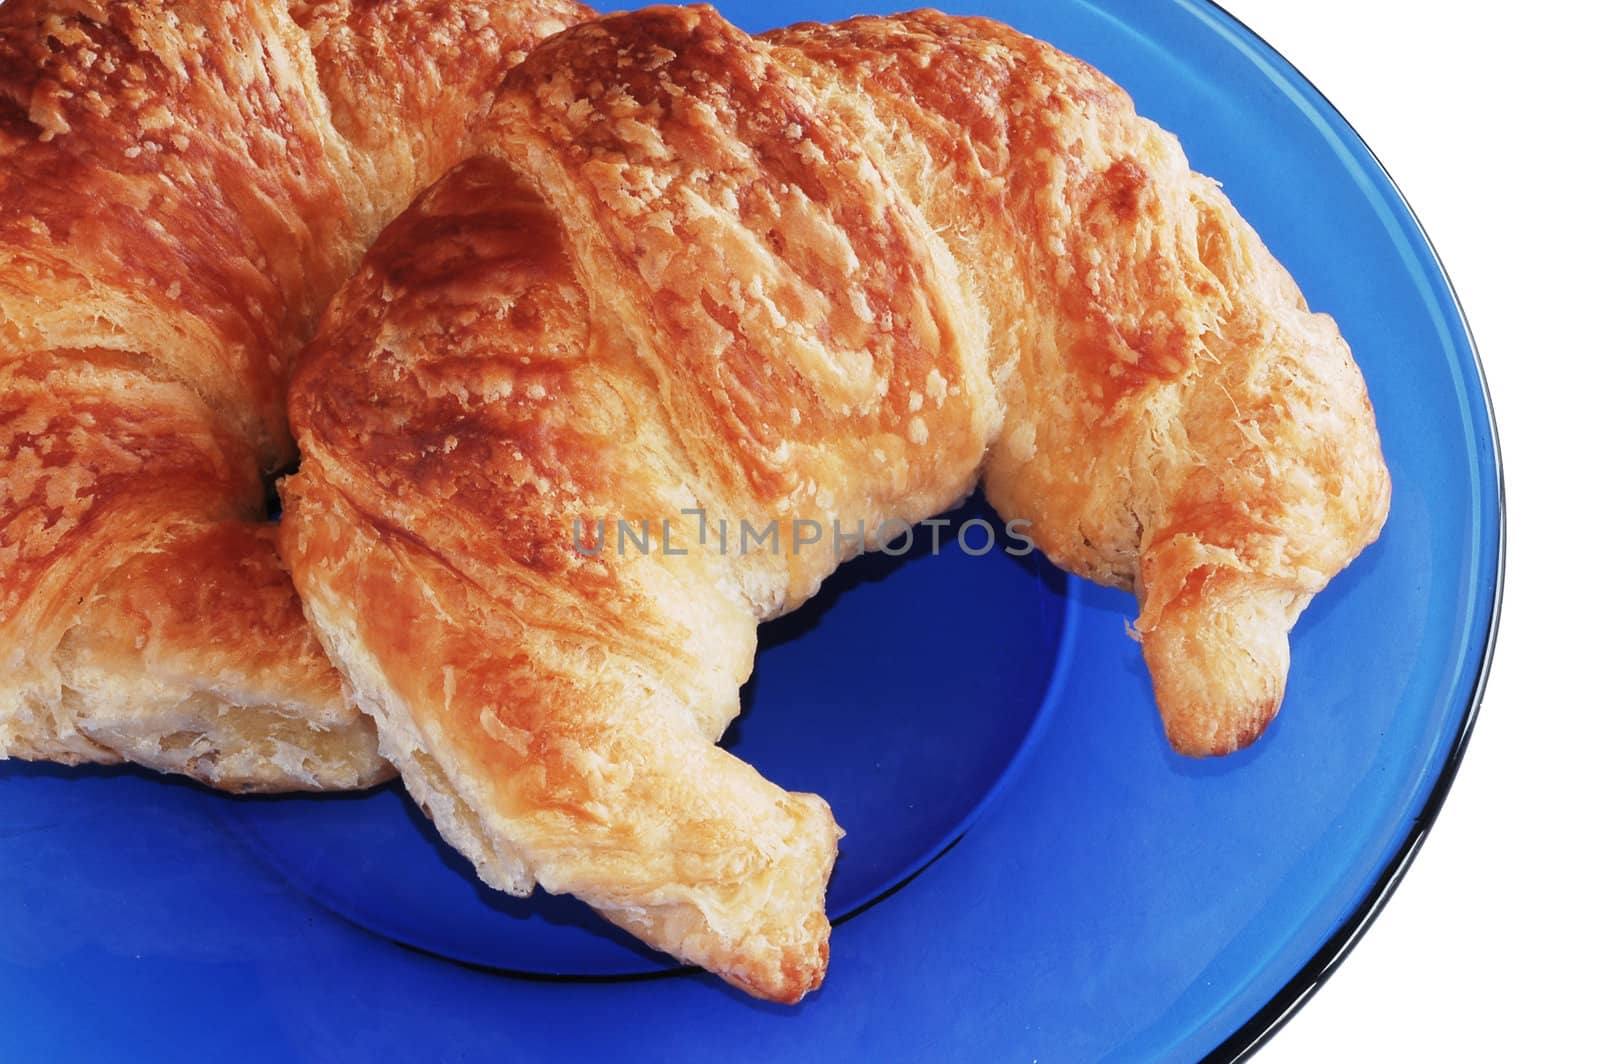 Two croissants on blue plate.